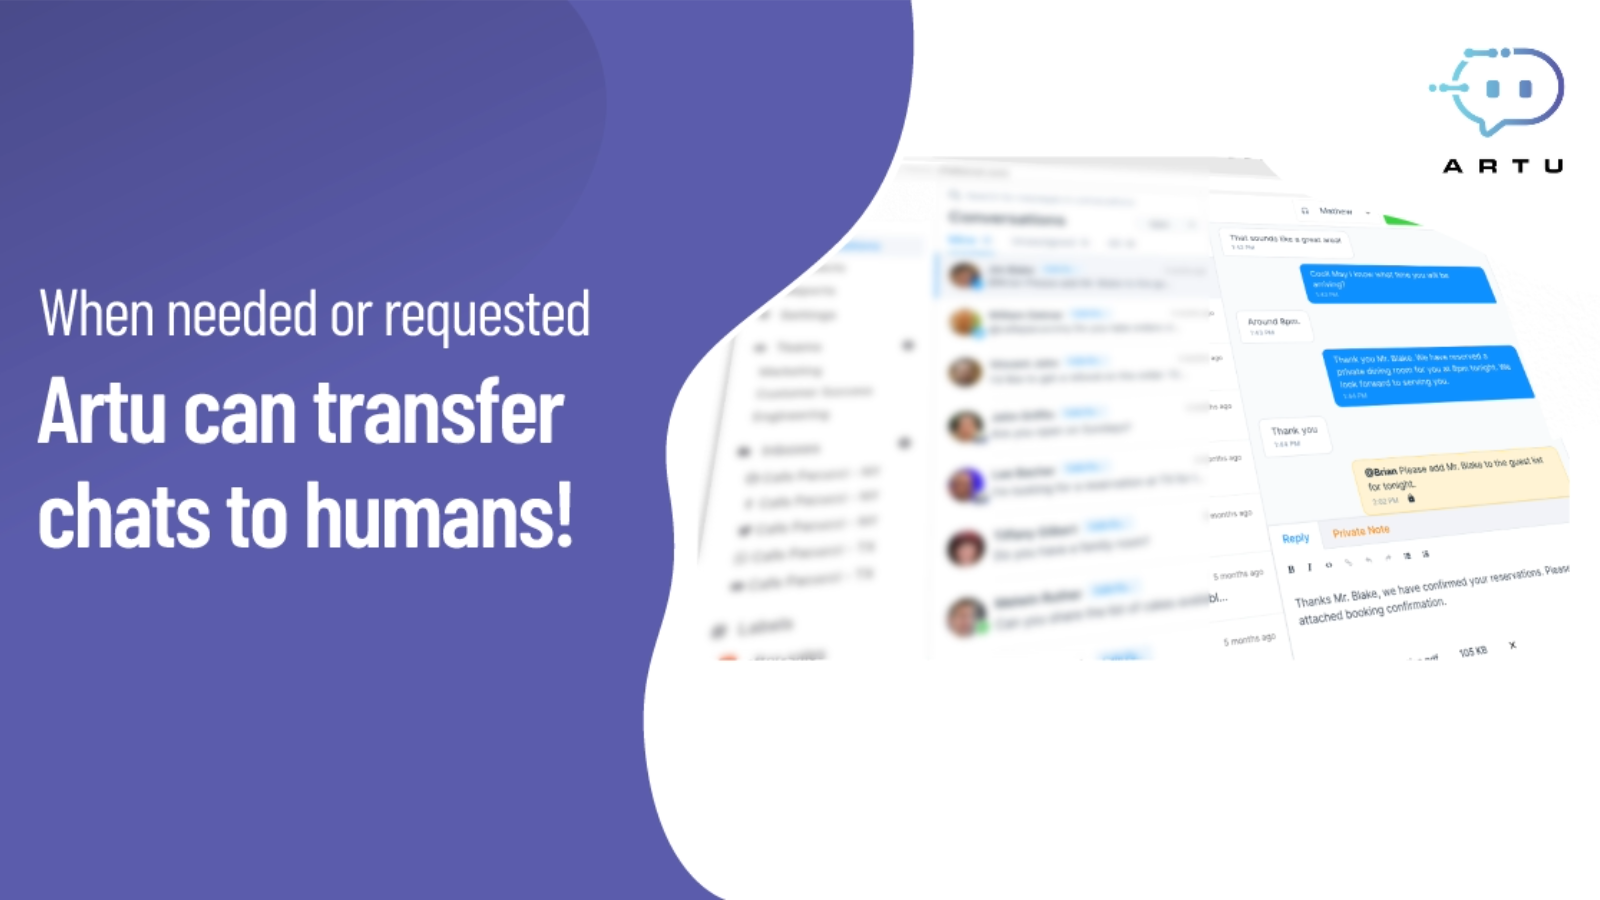 Artu can transfer conversations to humans when needed!